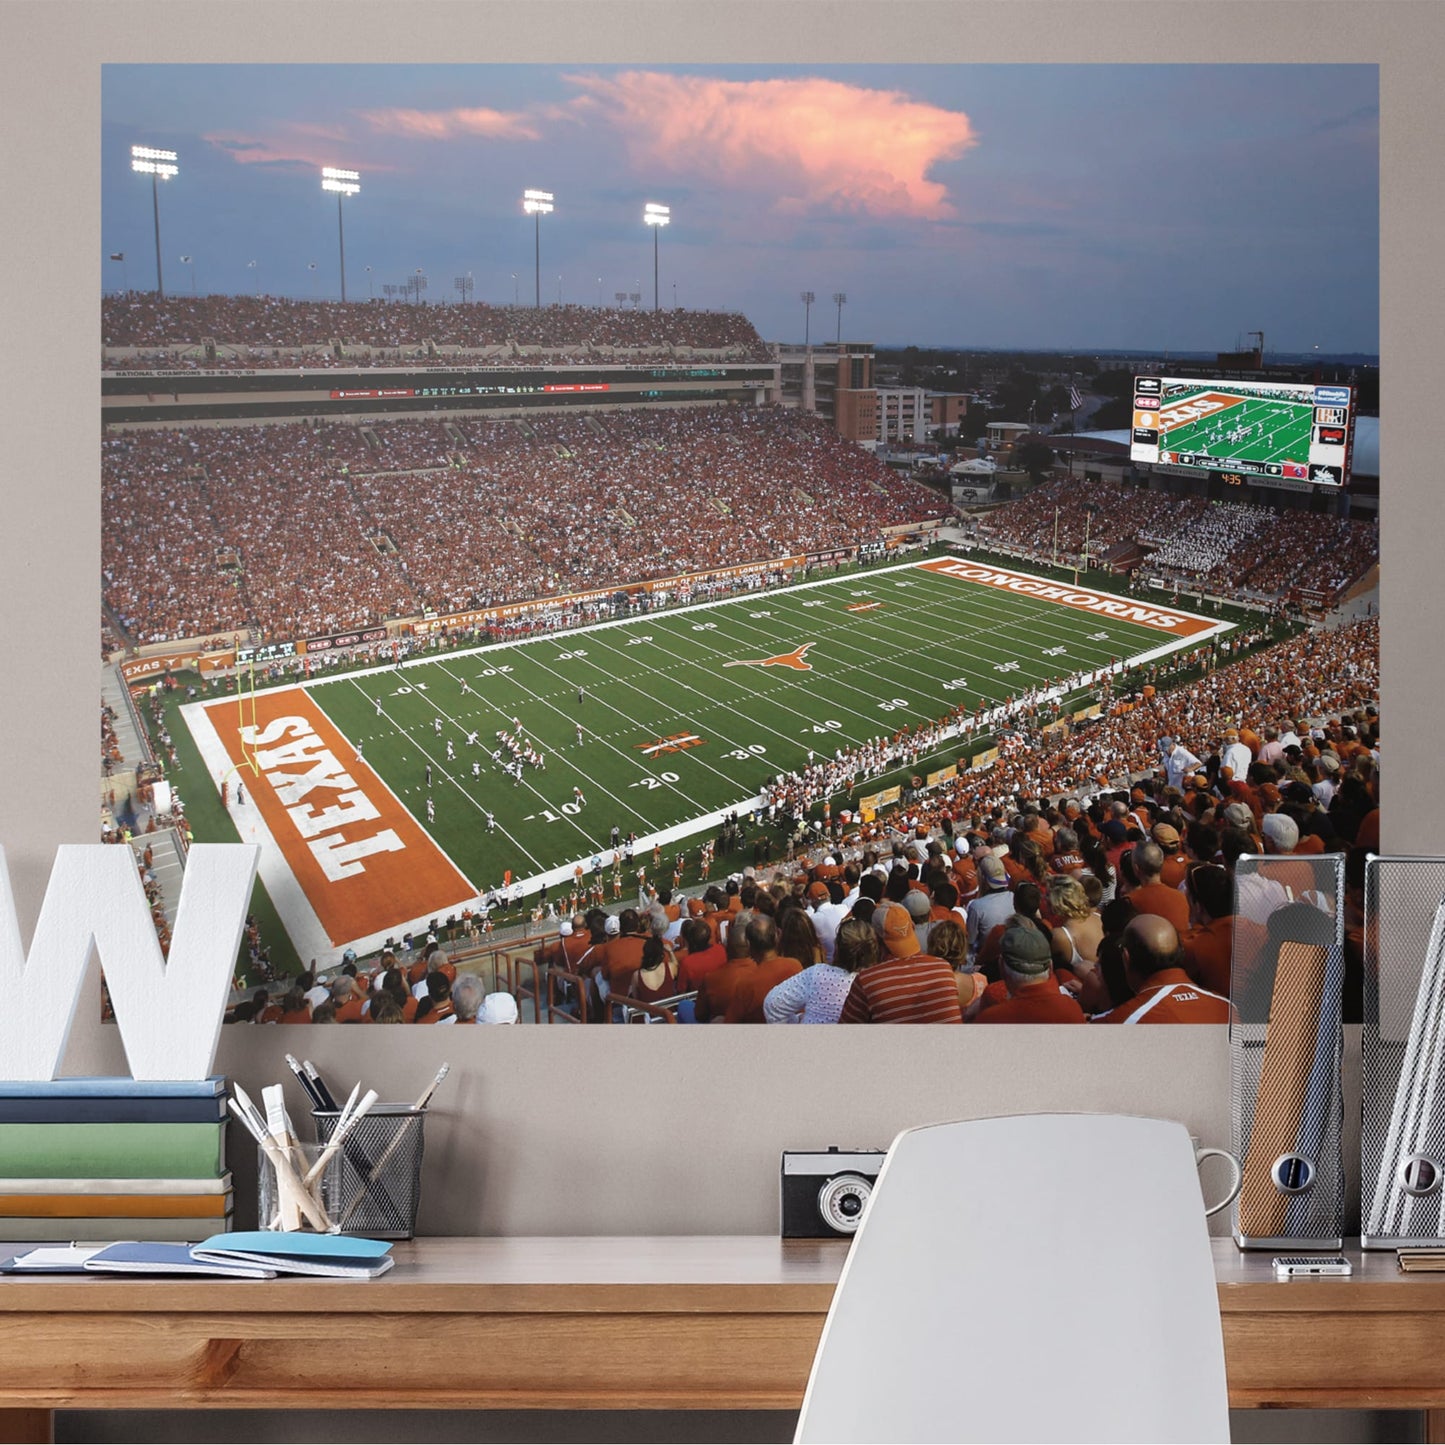 U of Texas: Texas Longhorns Darrell K. Royal Texas Memorial Stadium Endzone View Mural        - Officially Licensed NCAA Removable Wall   Adhesive Decal